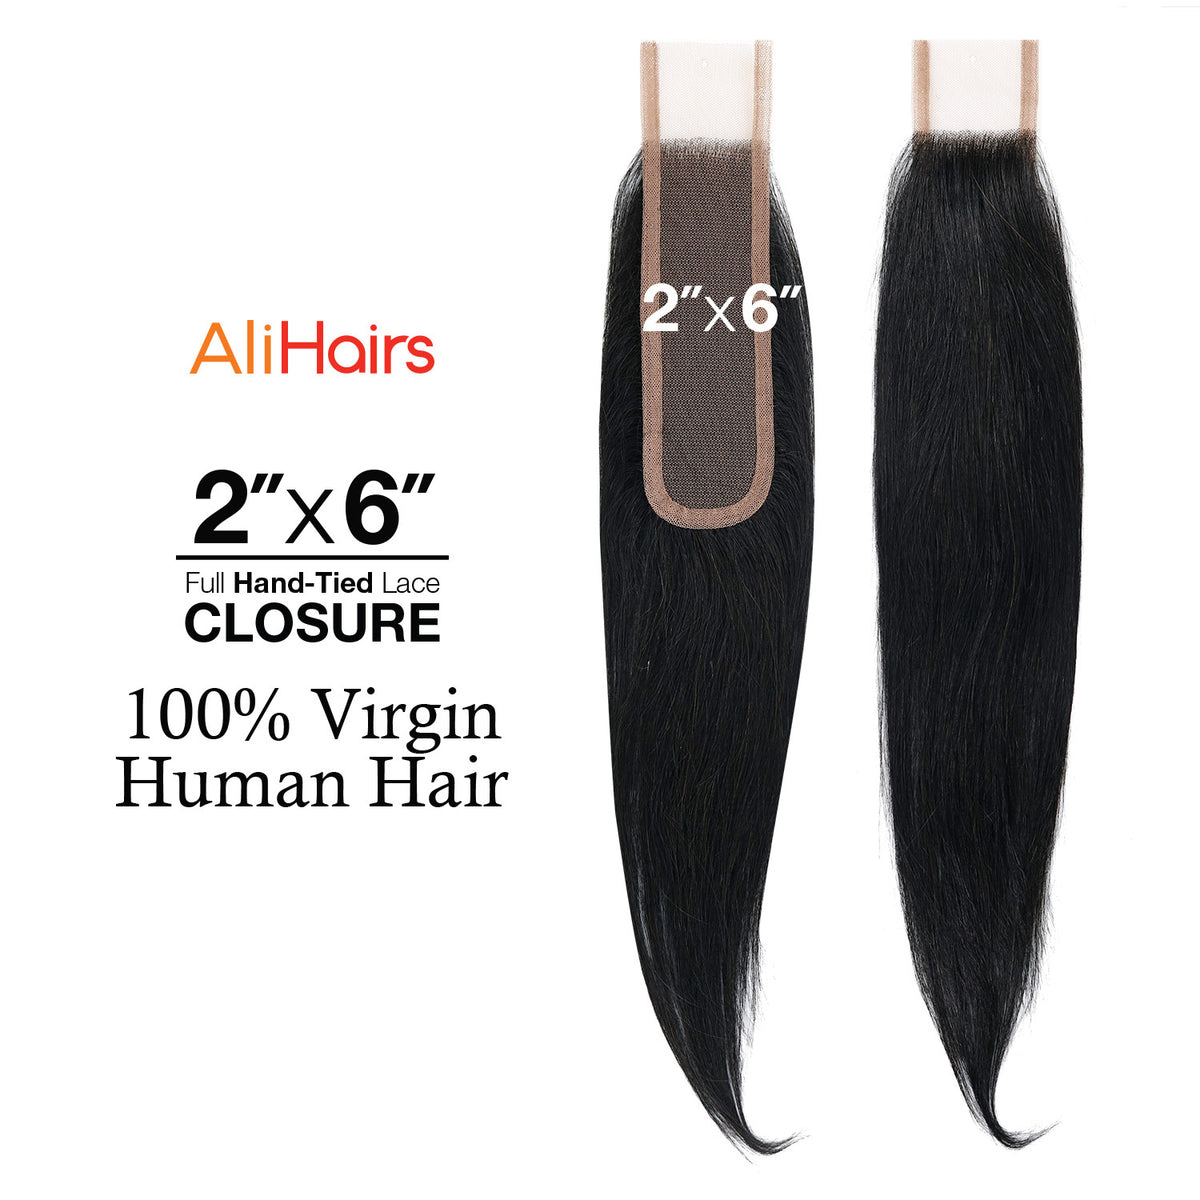 2x6, HD Lace, Closure, Parting, Parting Closure, Straight